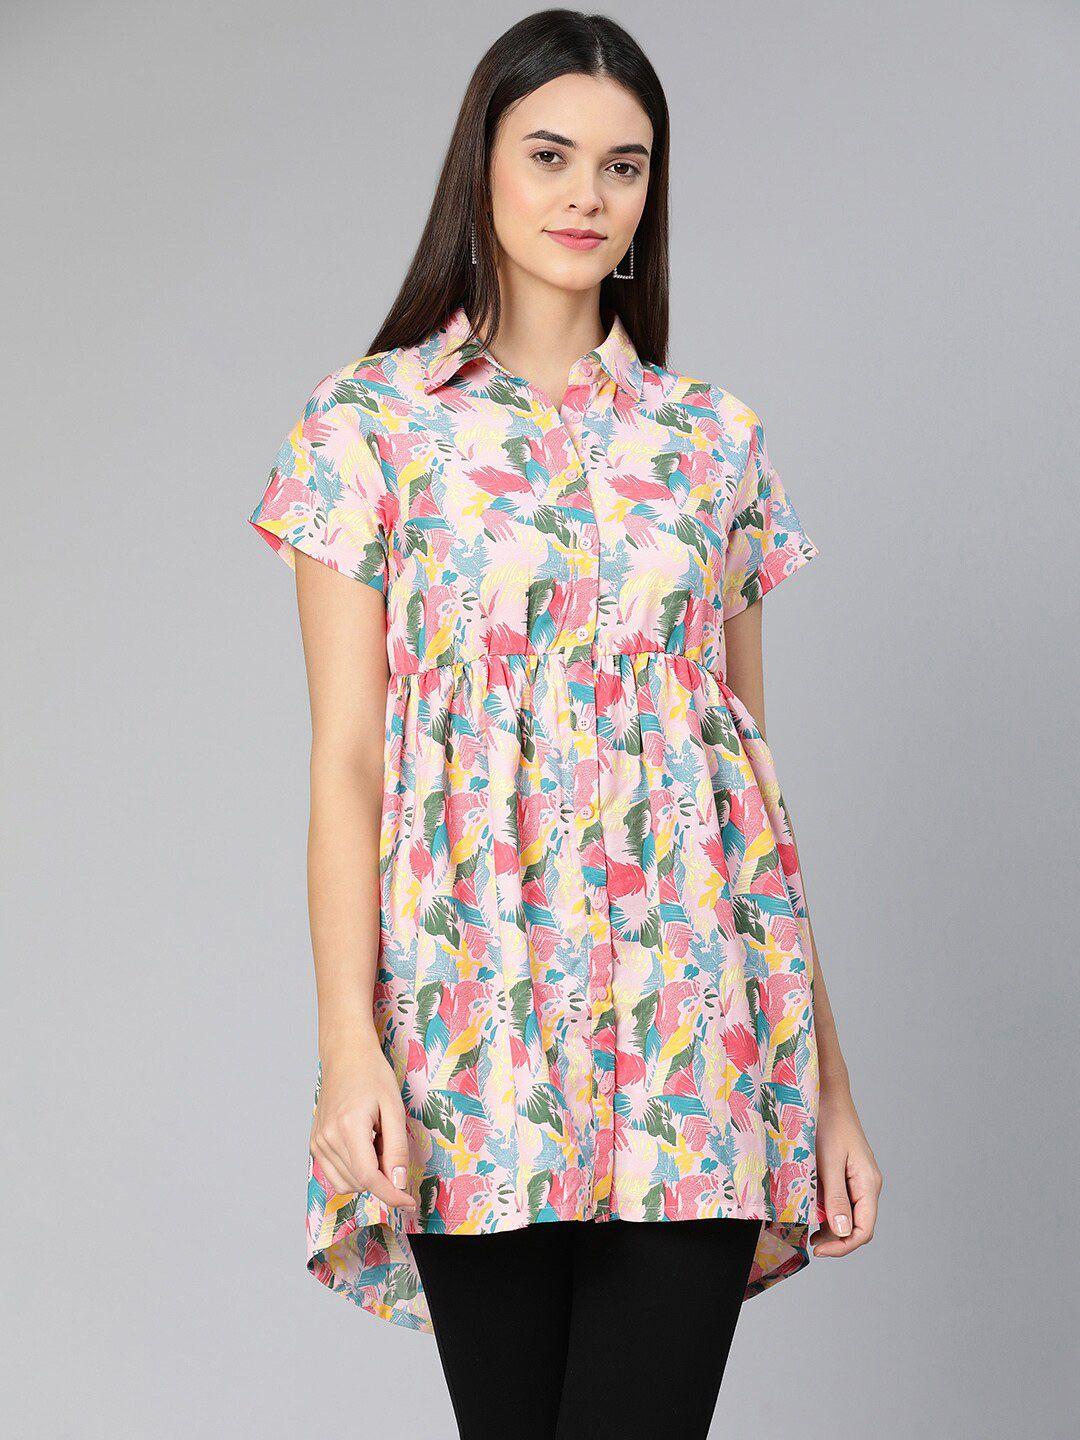 oxolloxo multicoloured floral print crepe shirt style top